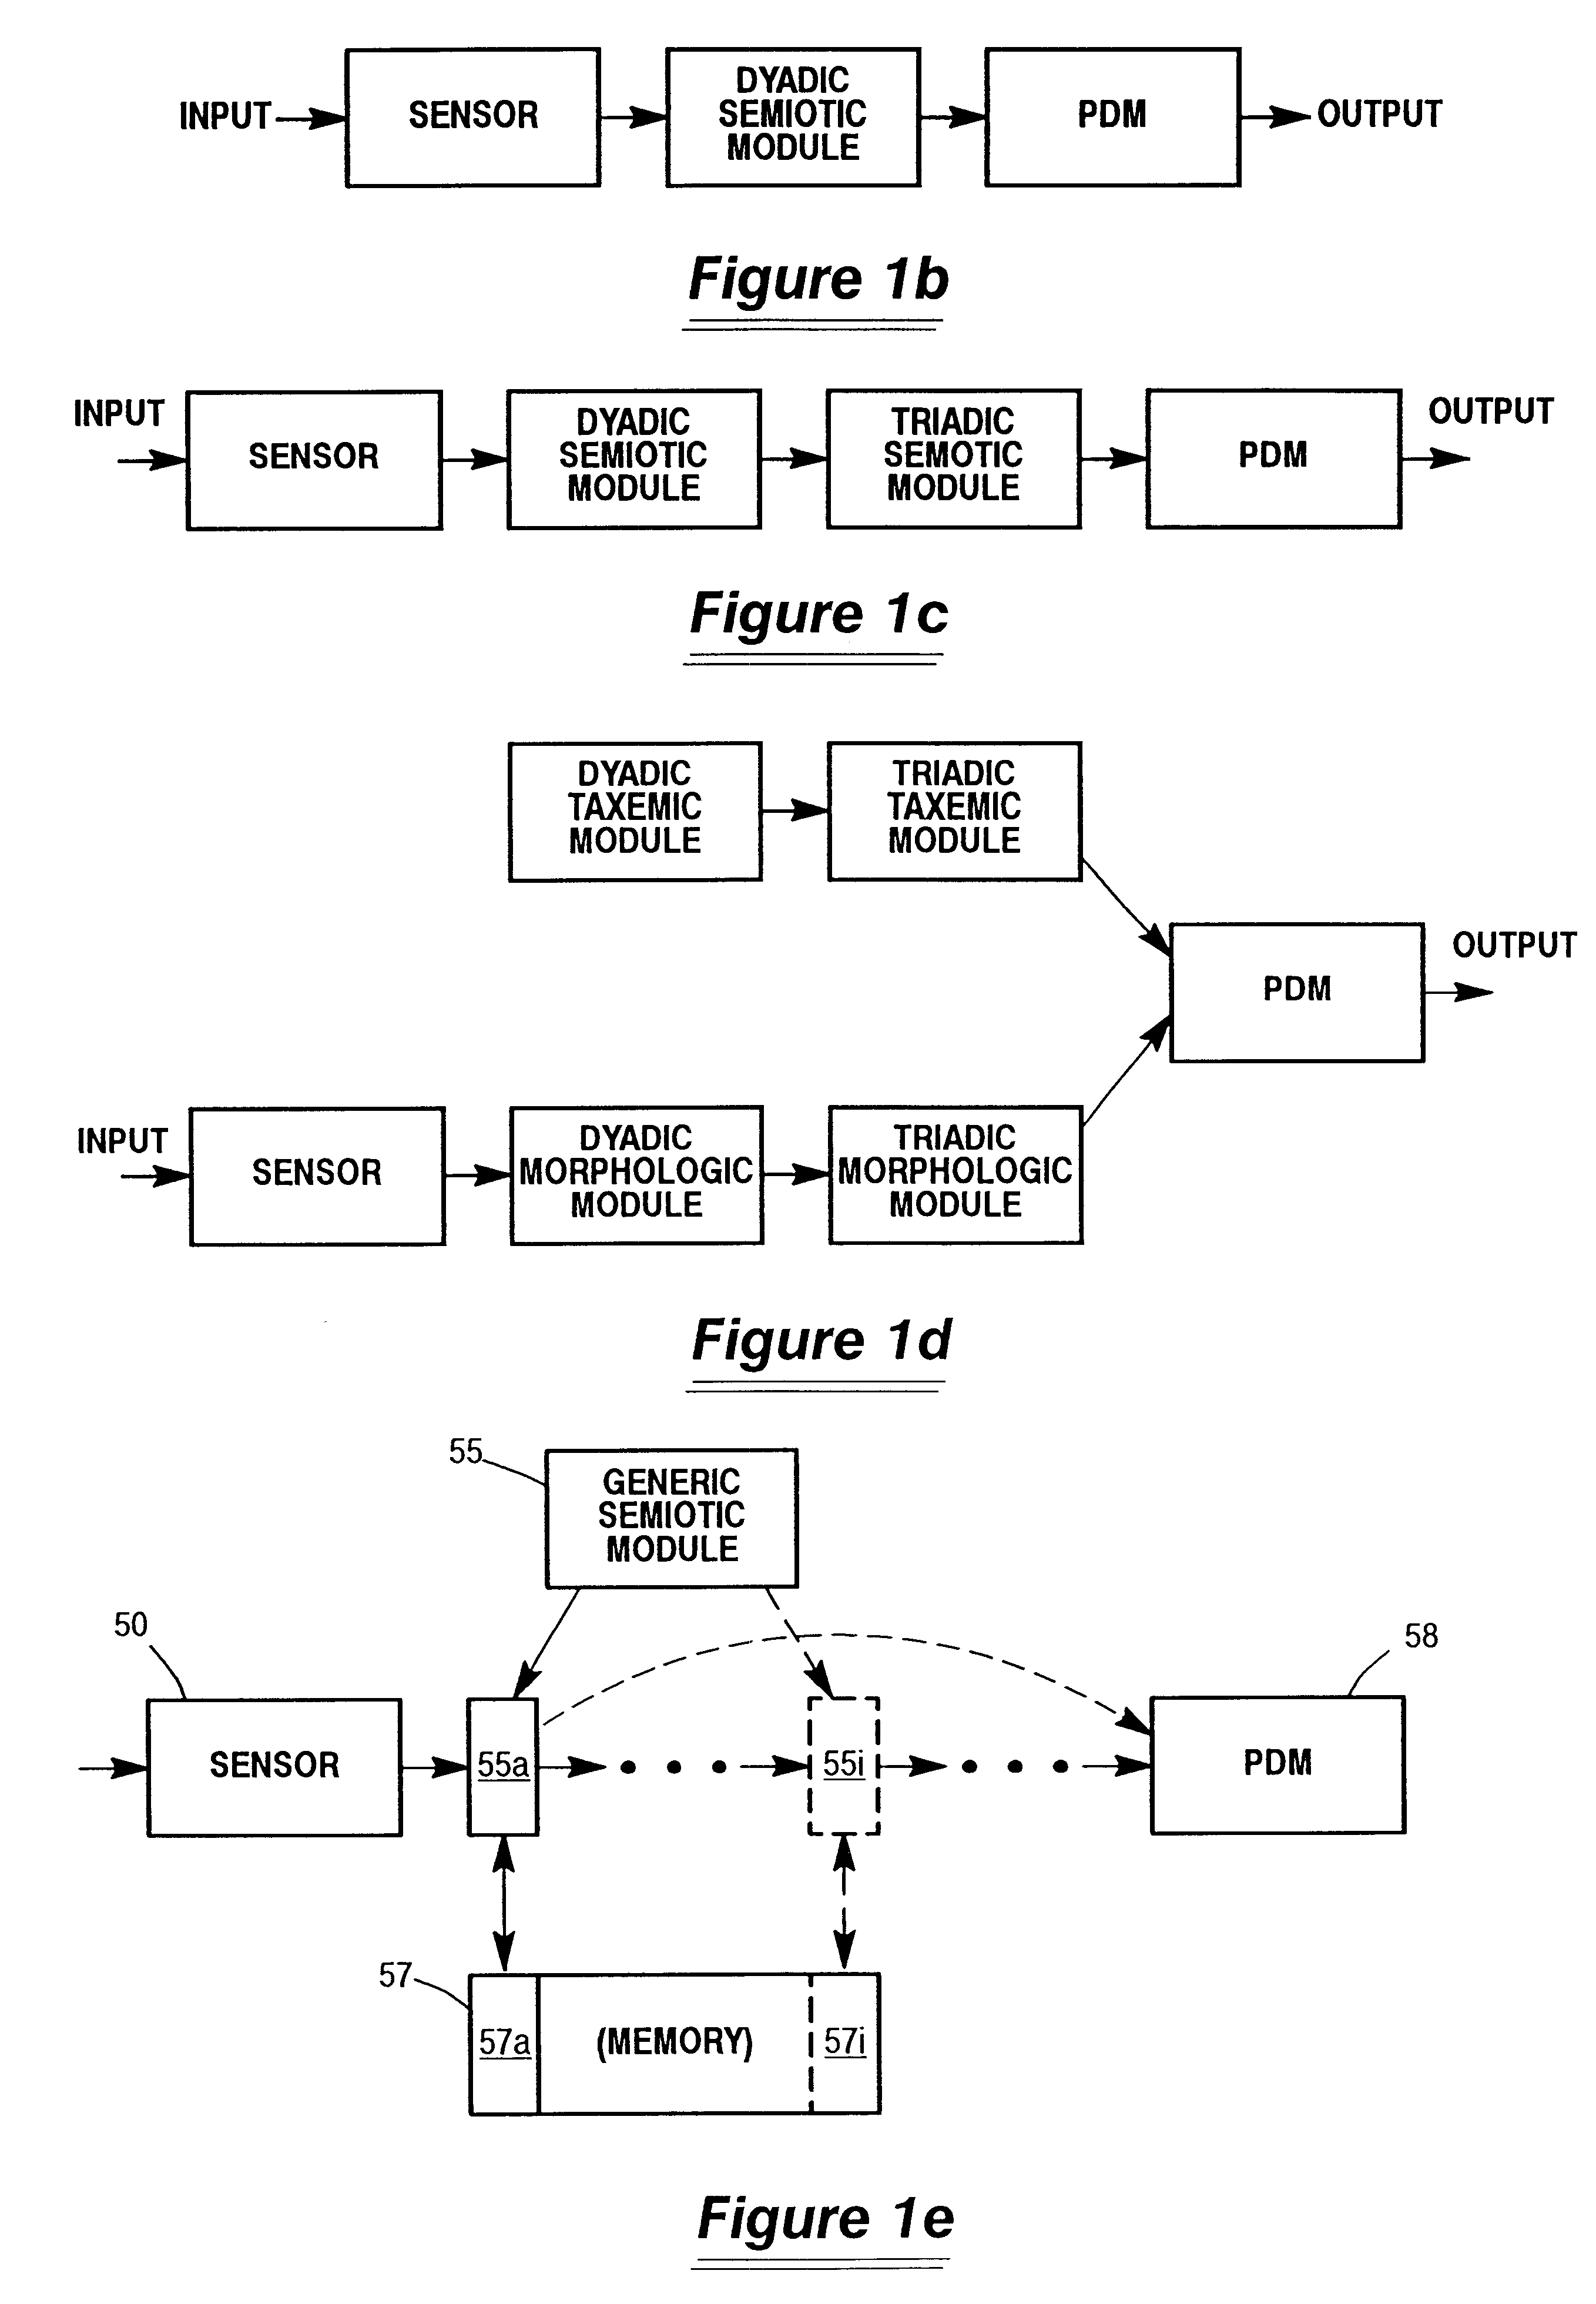 Semiotic decision making system for responding to natural language queries and components thereof